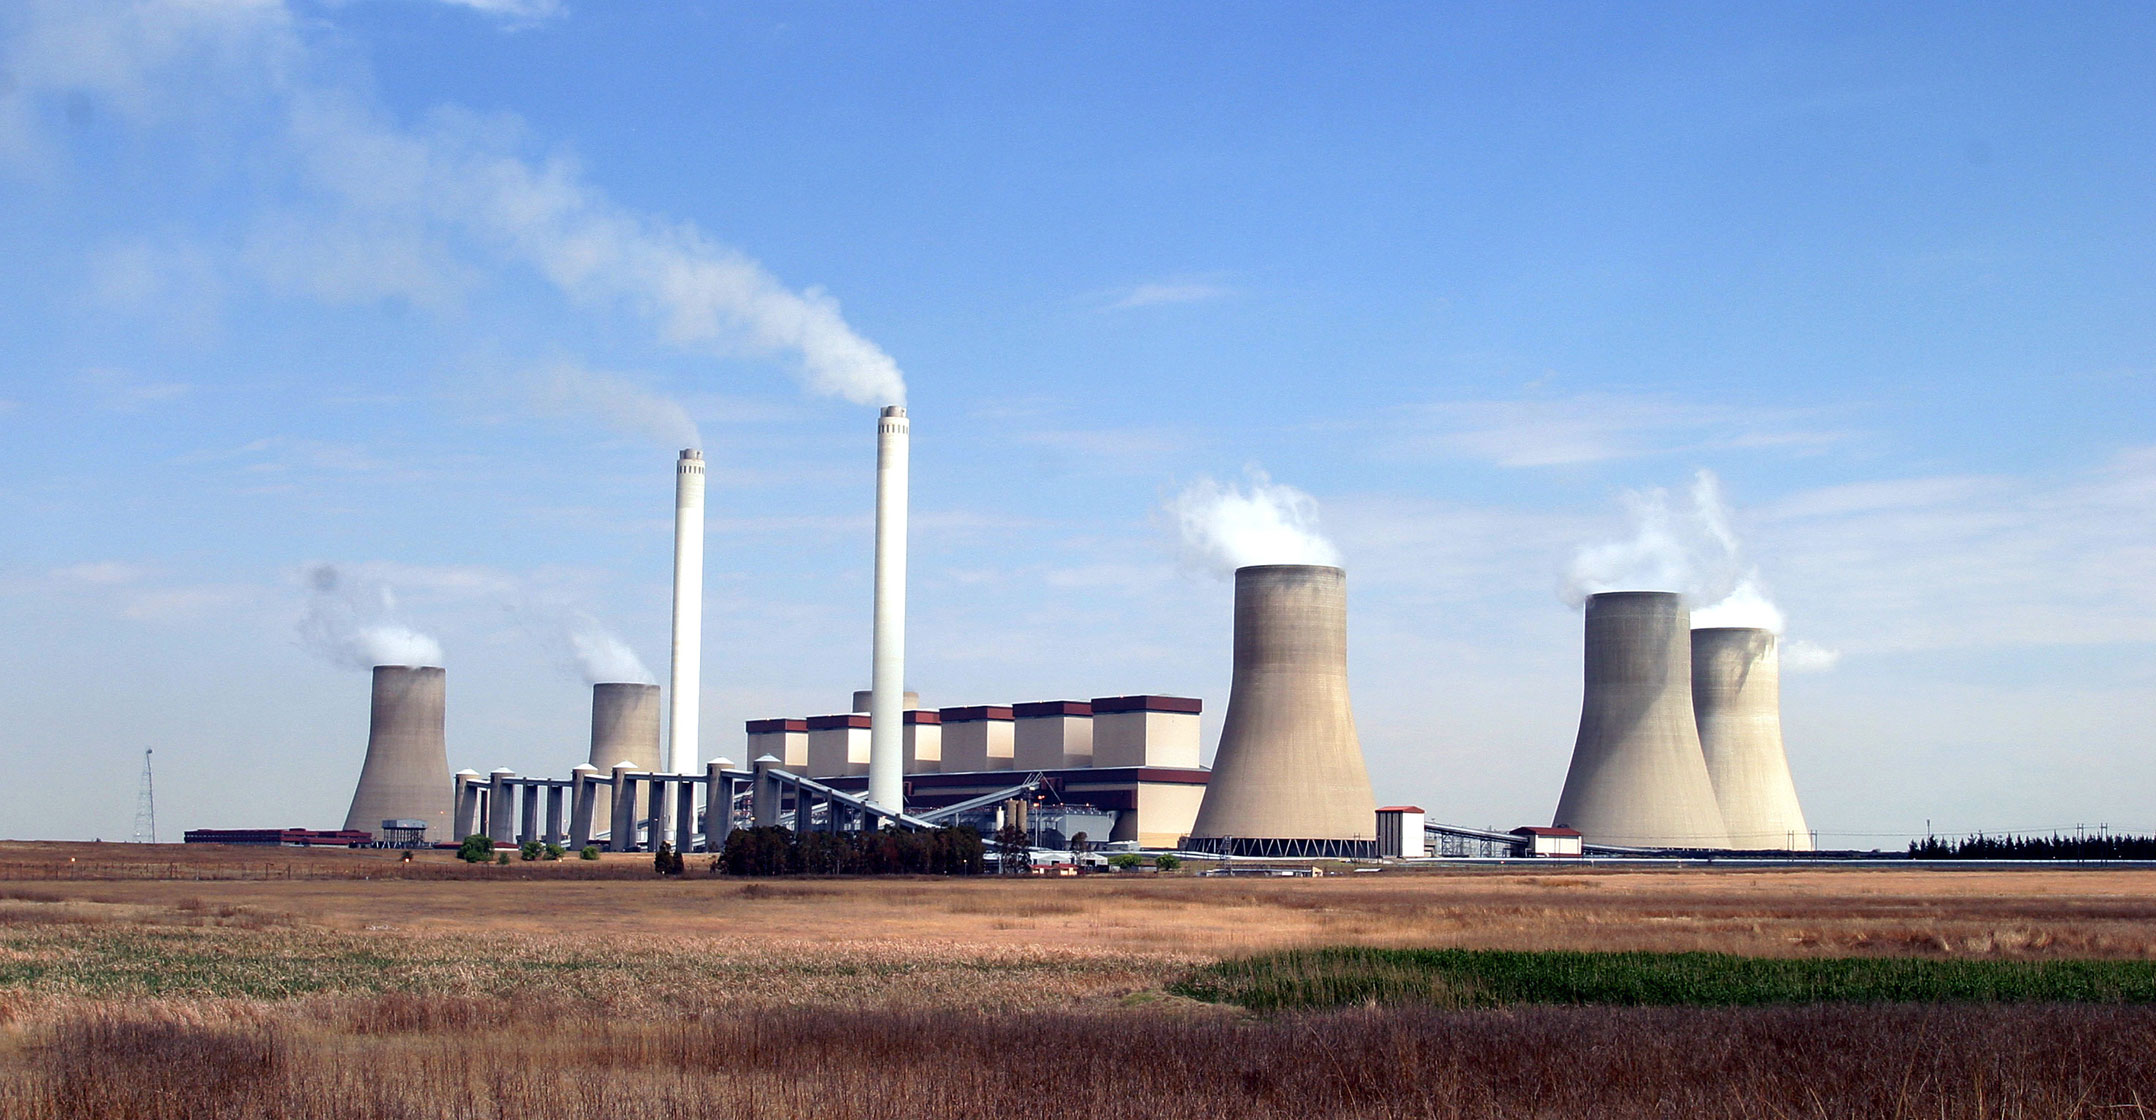 Chinese Bank Takes Absolute Control Over All Eskom Power Stations In South Africa